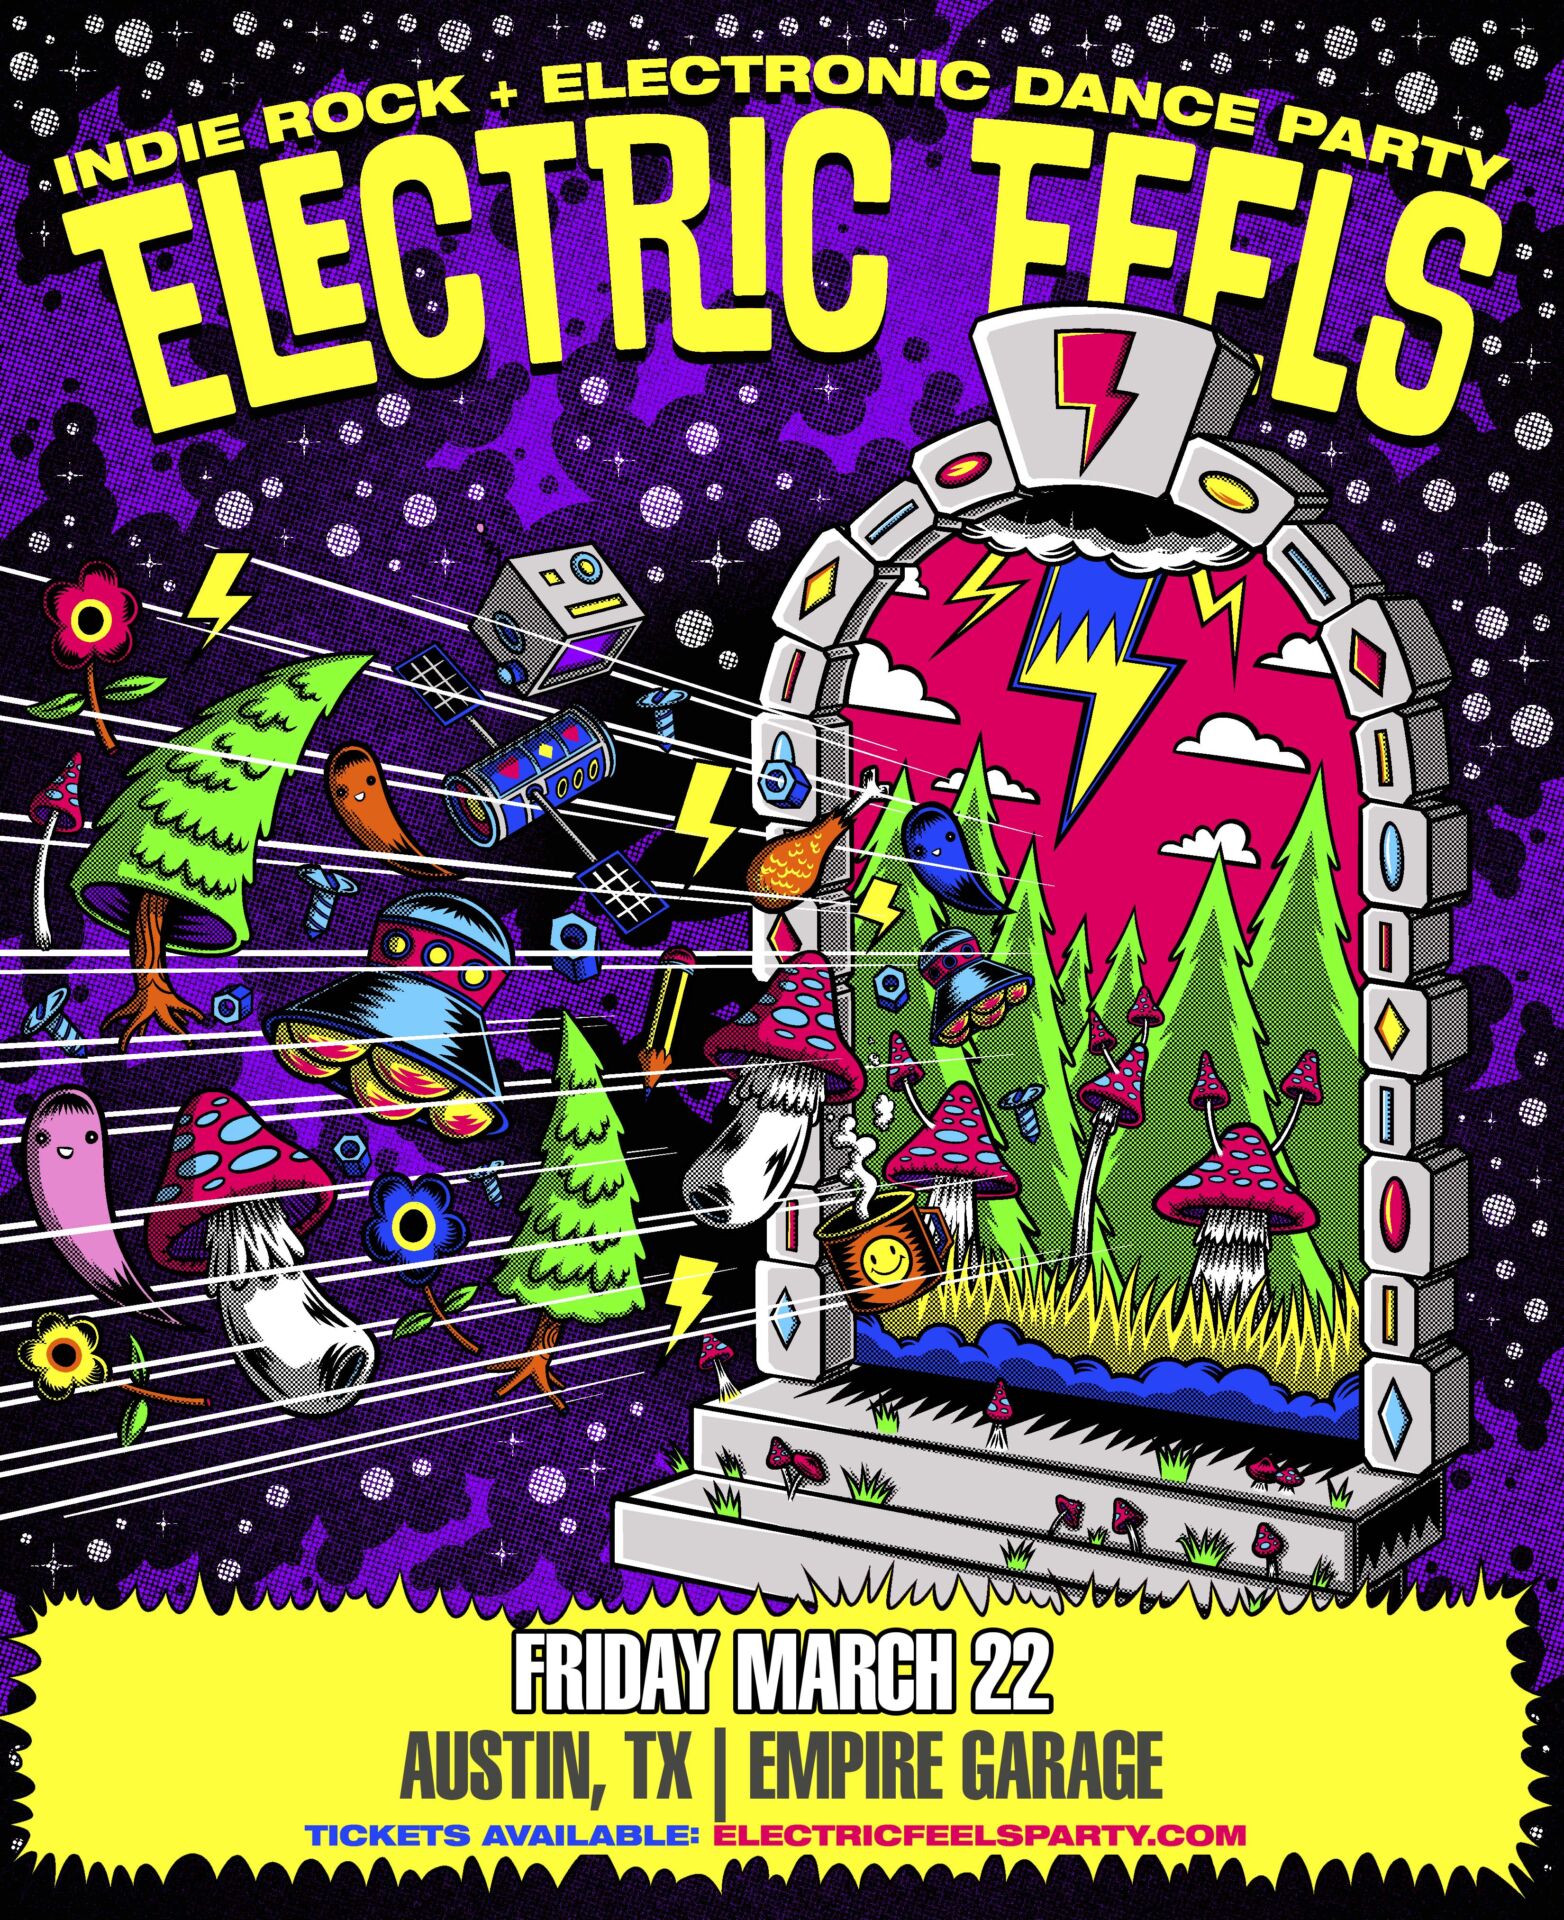 Electric Feels at Empire Garage